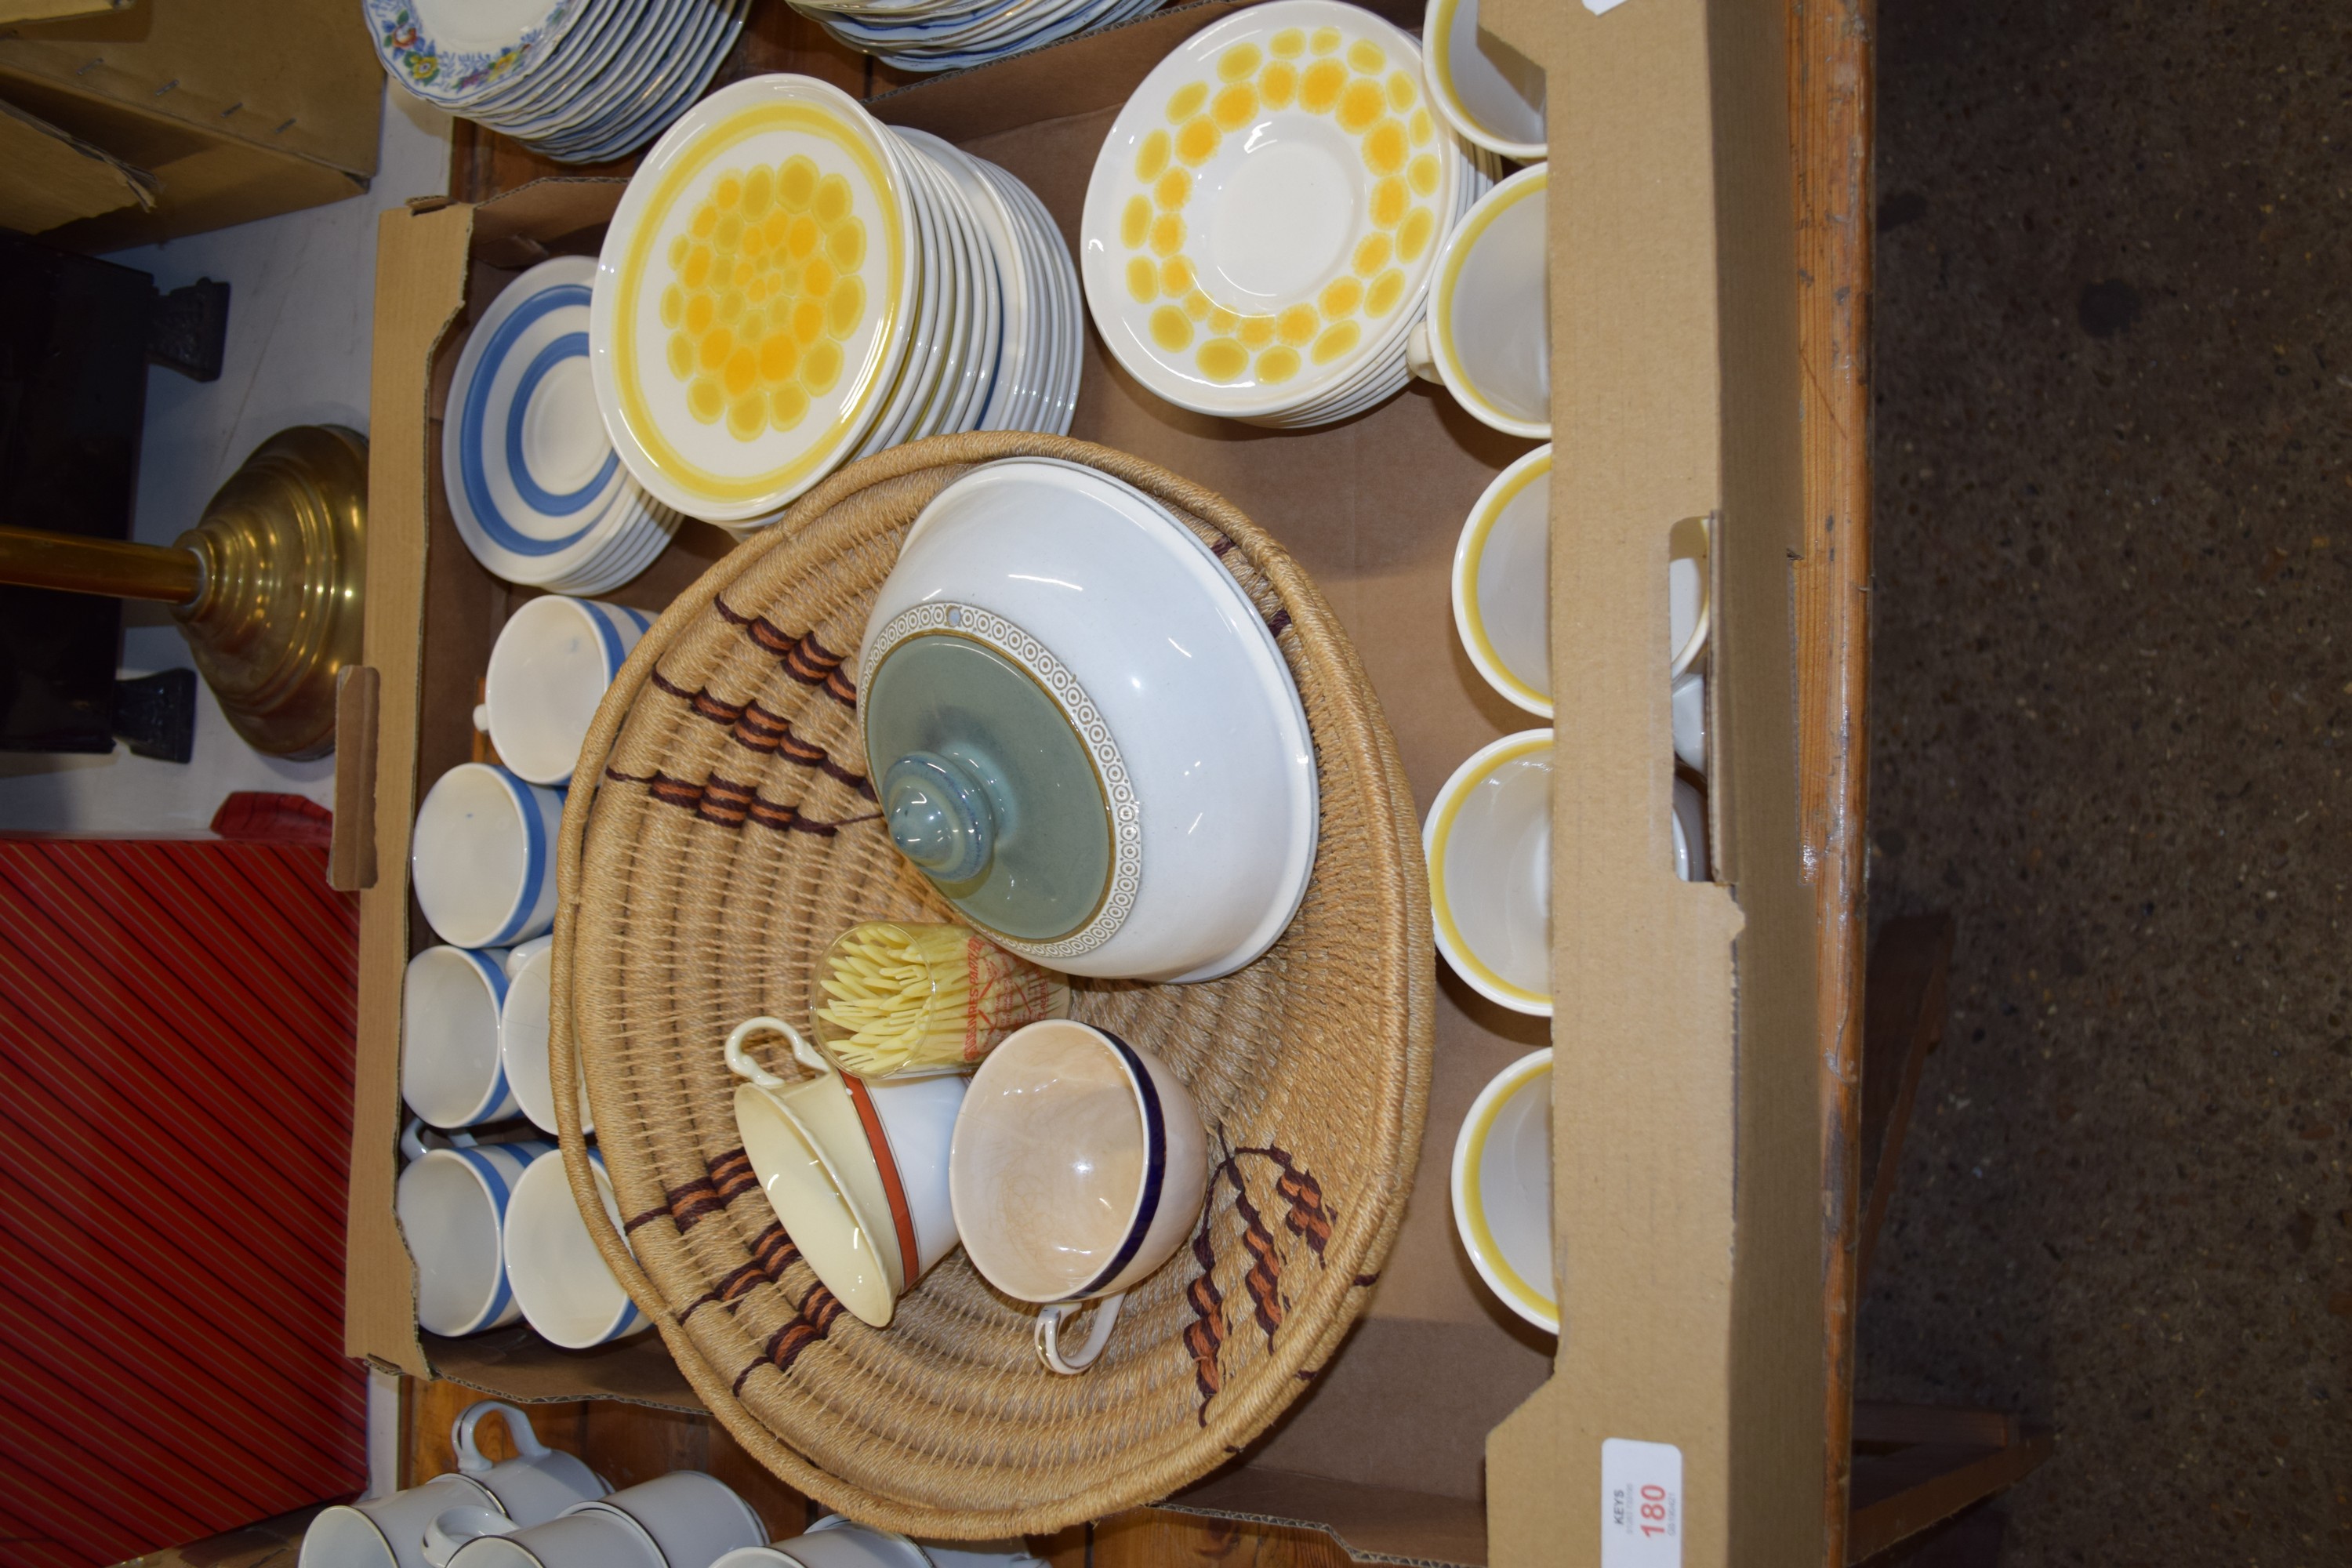 MAINLY KITCHEN CERAMICS INCLUDING CUPS AND SAUCERS WITH BLUE AND WHITE DESIGN, PLATES IN A